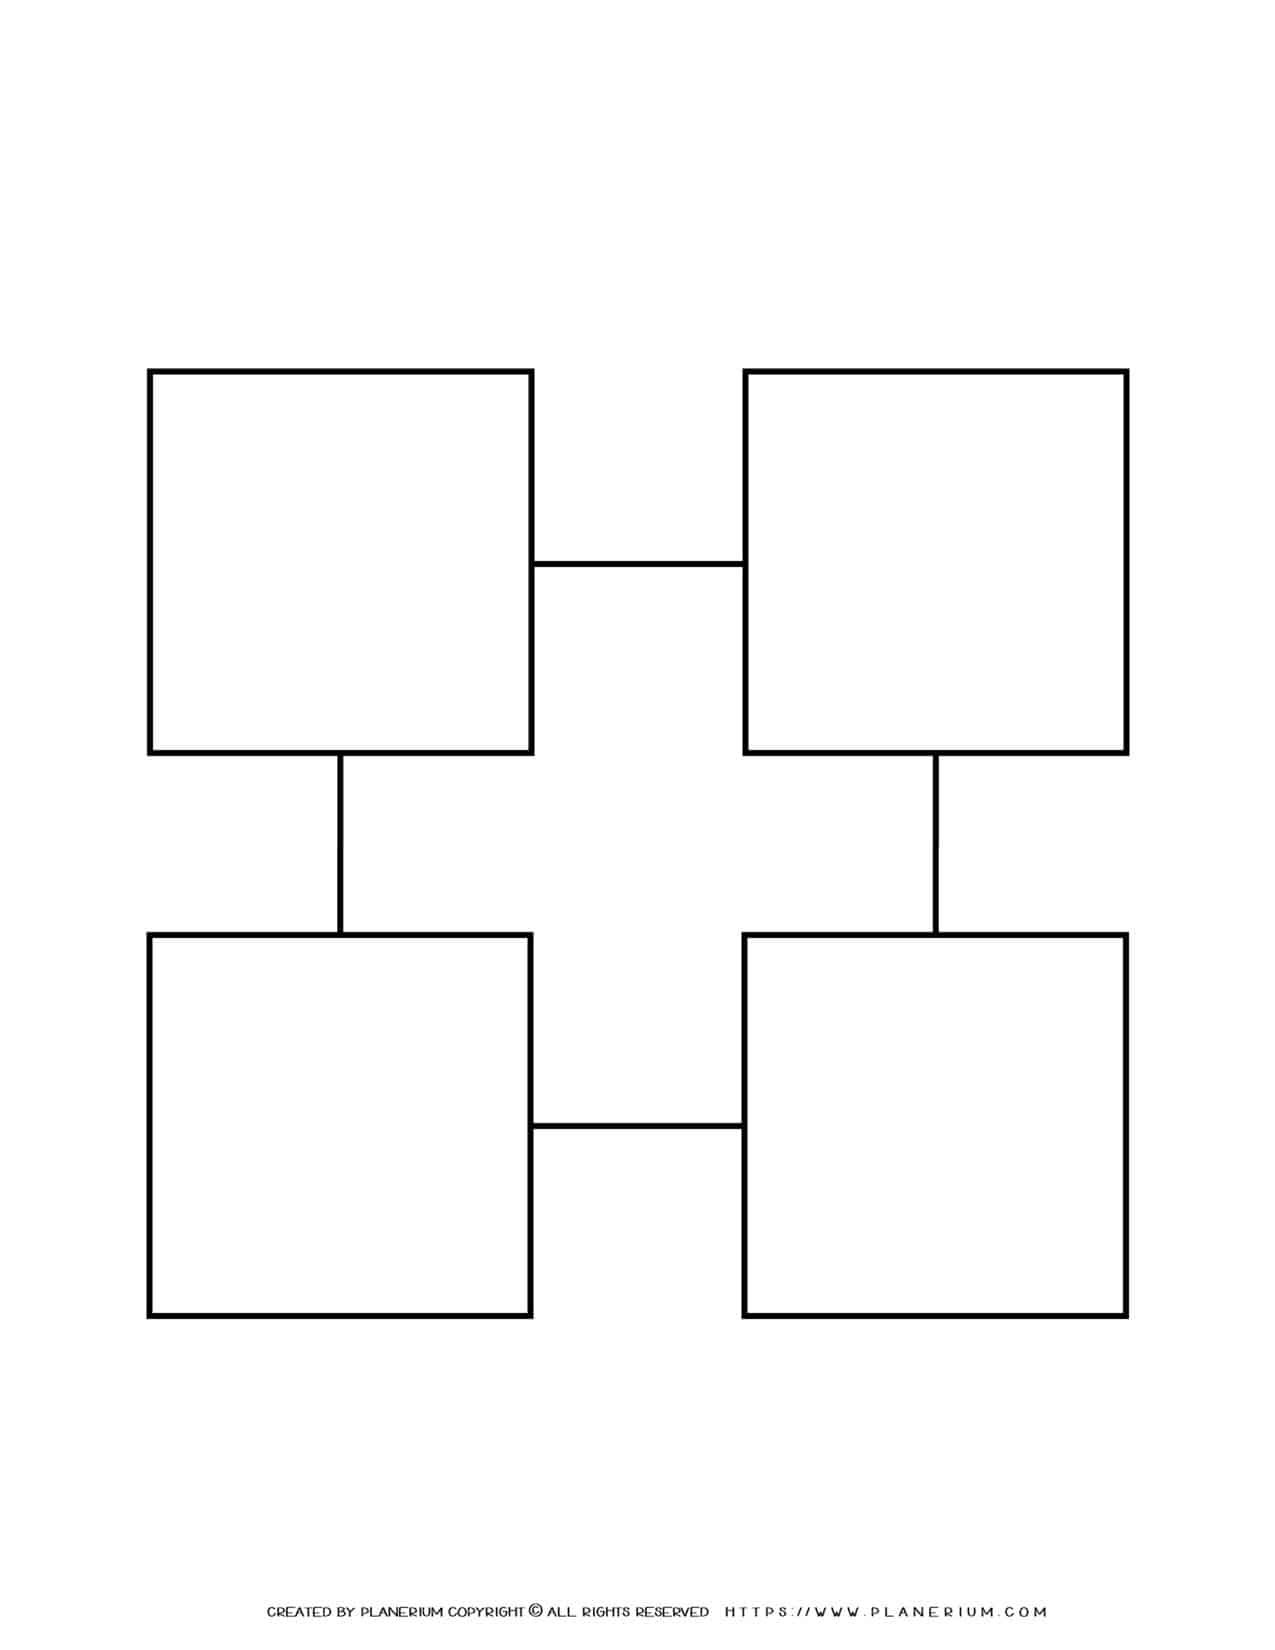 Sequence Chart Template - Four Squares on a Square | Planerium